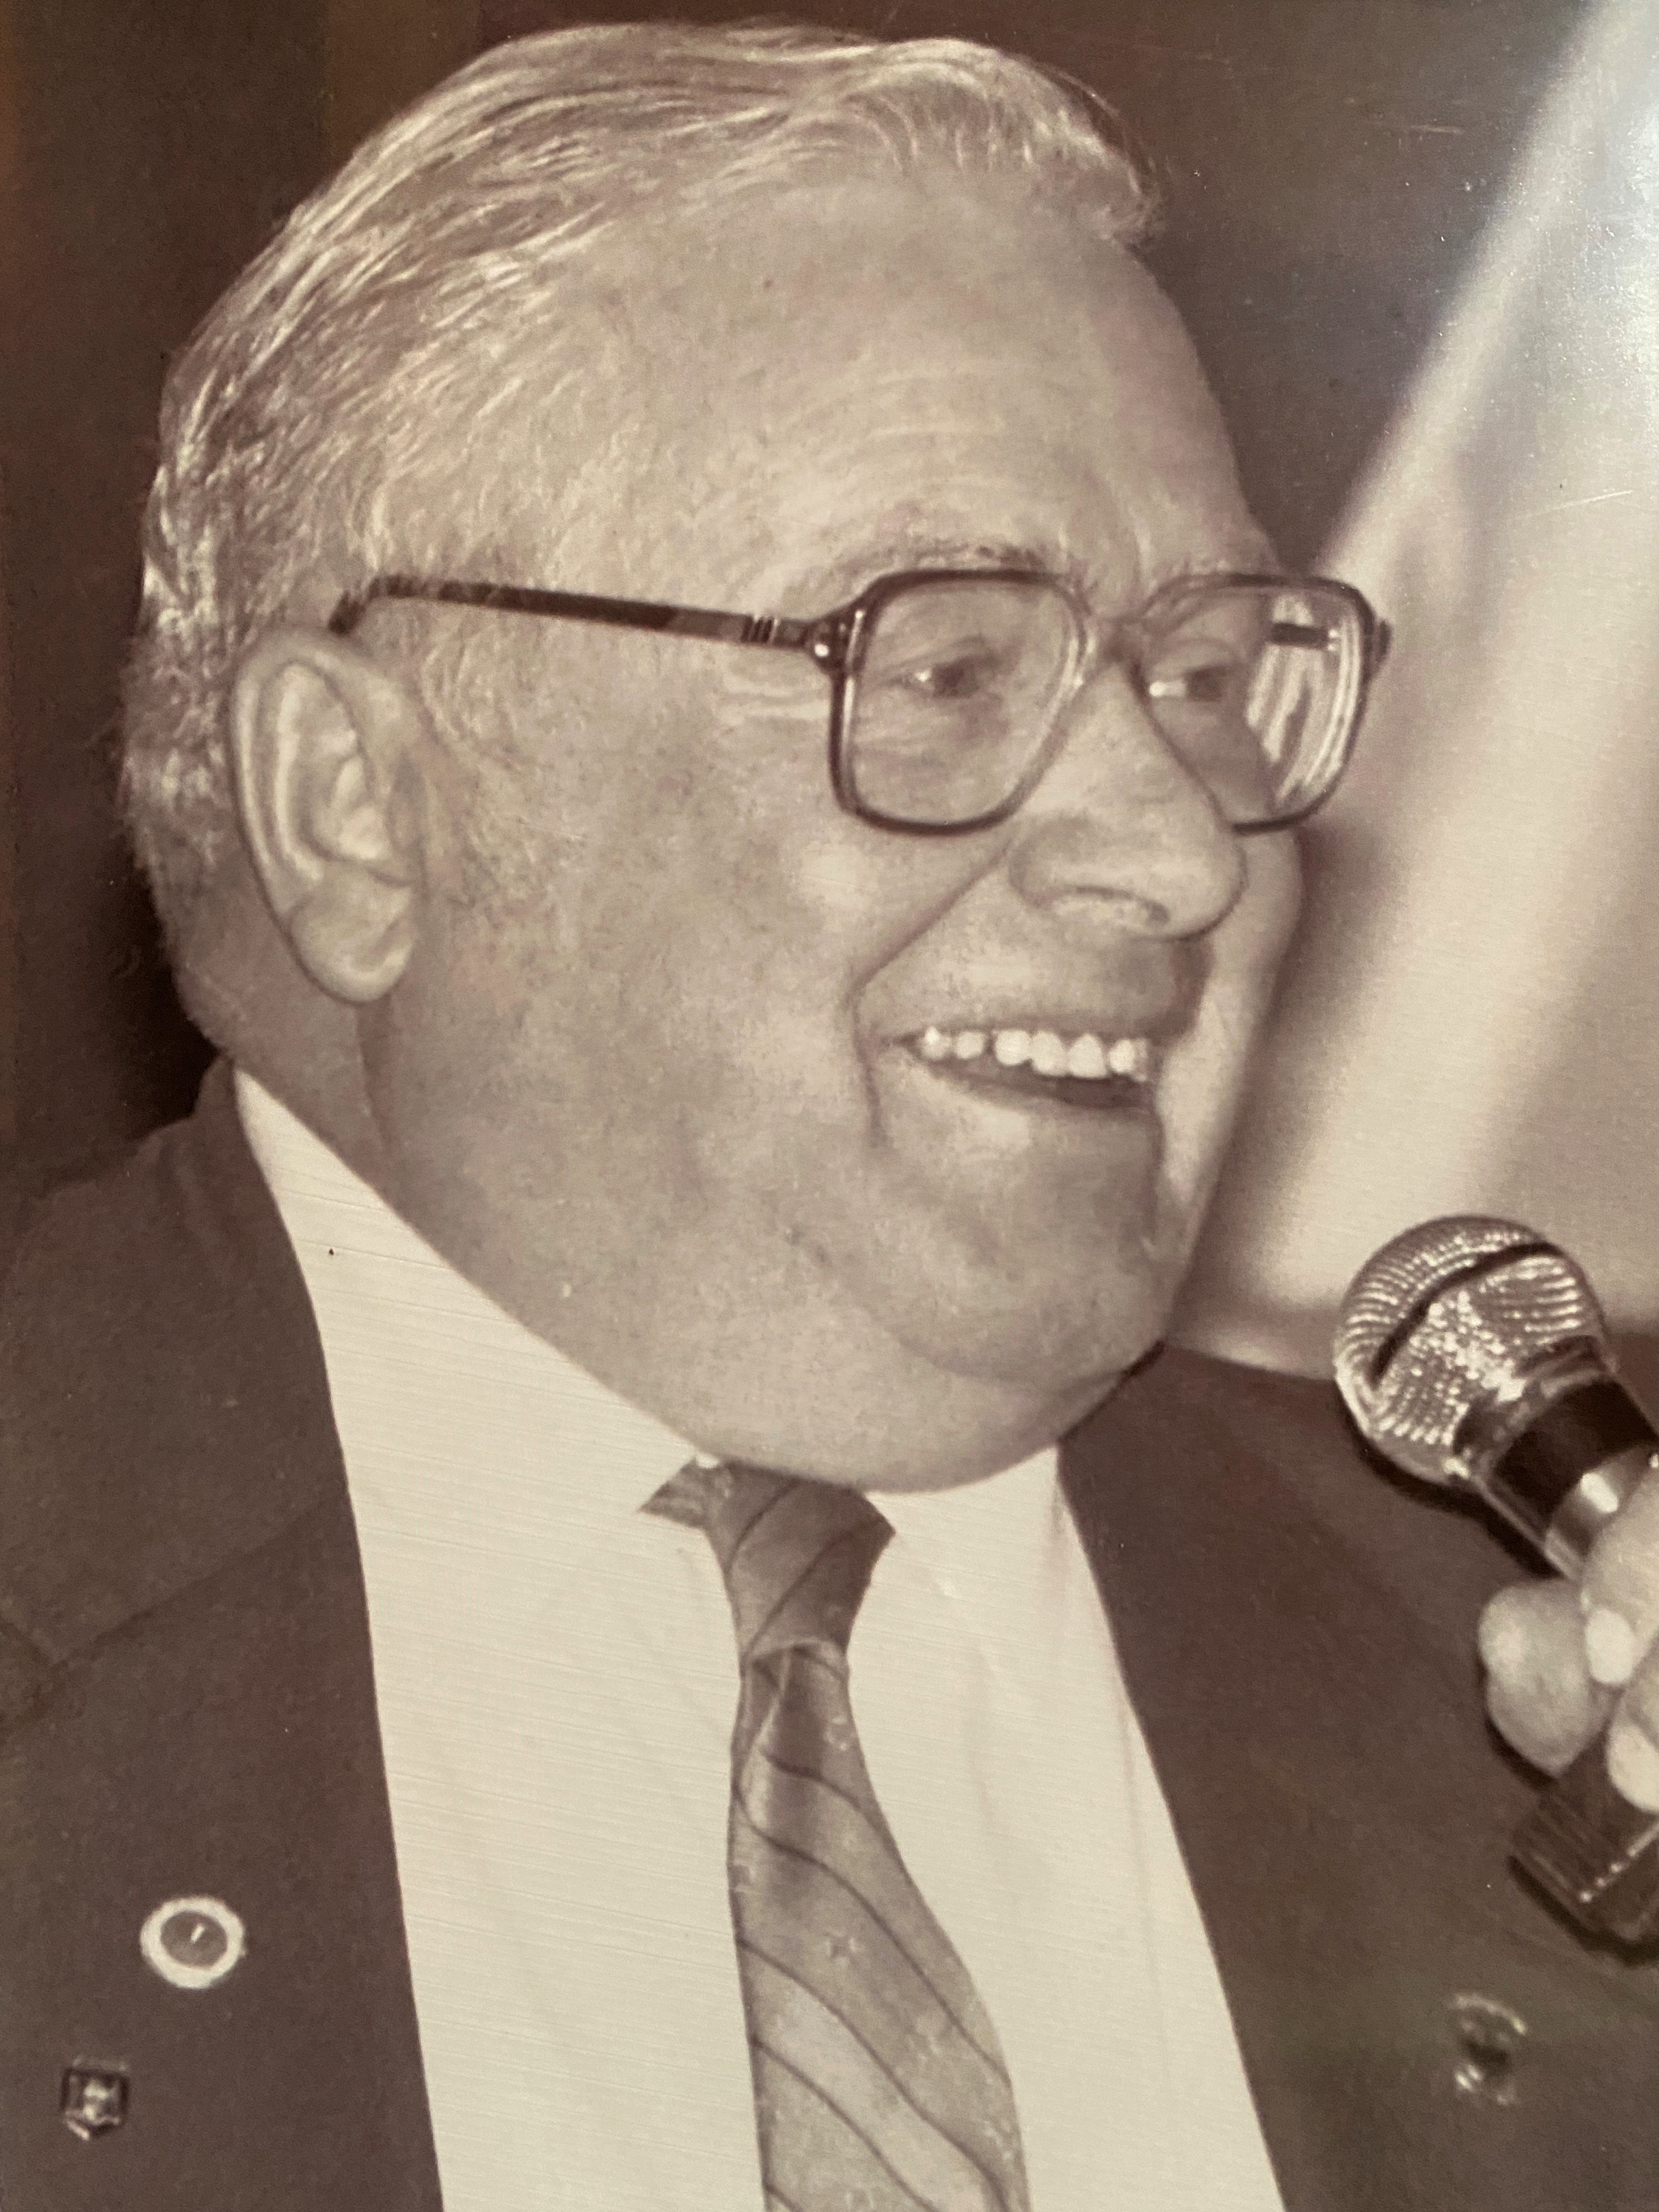 Black and white photograph of man in a business suit smiling and looking to the side